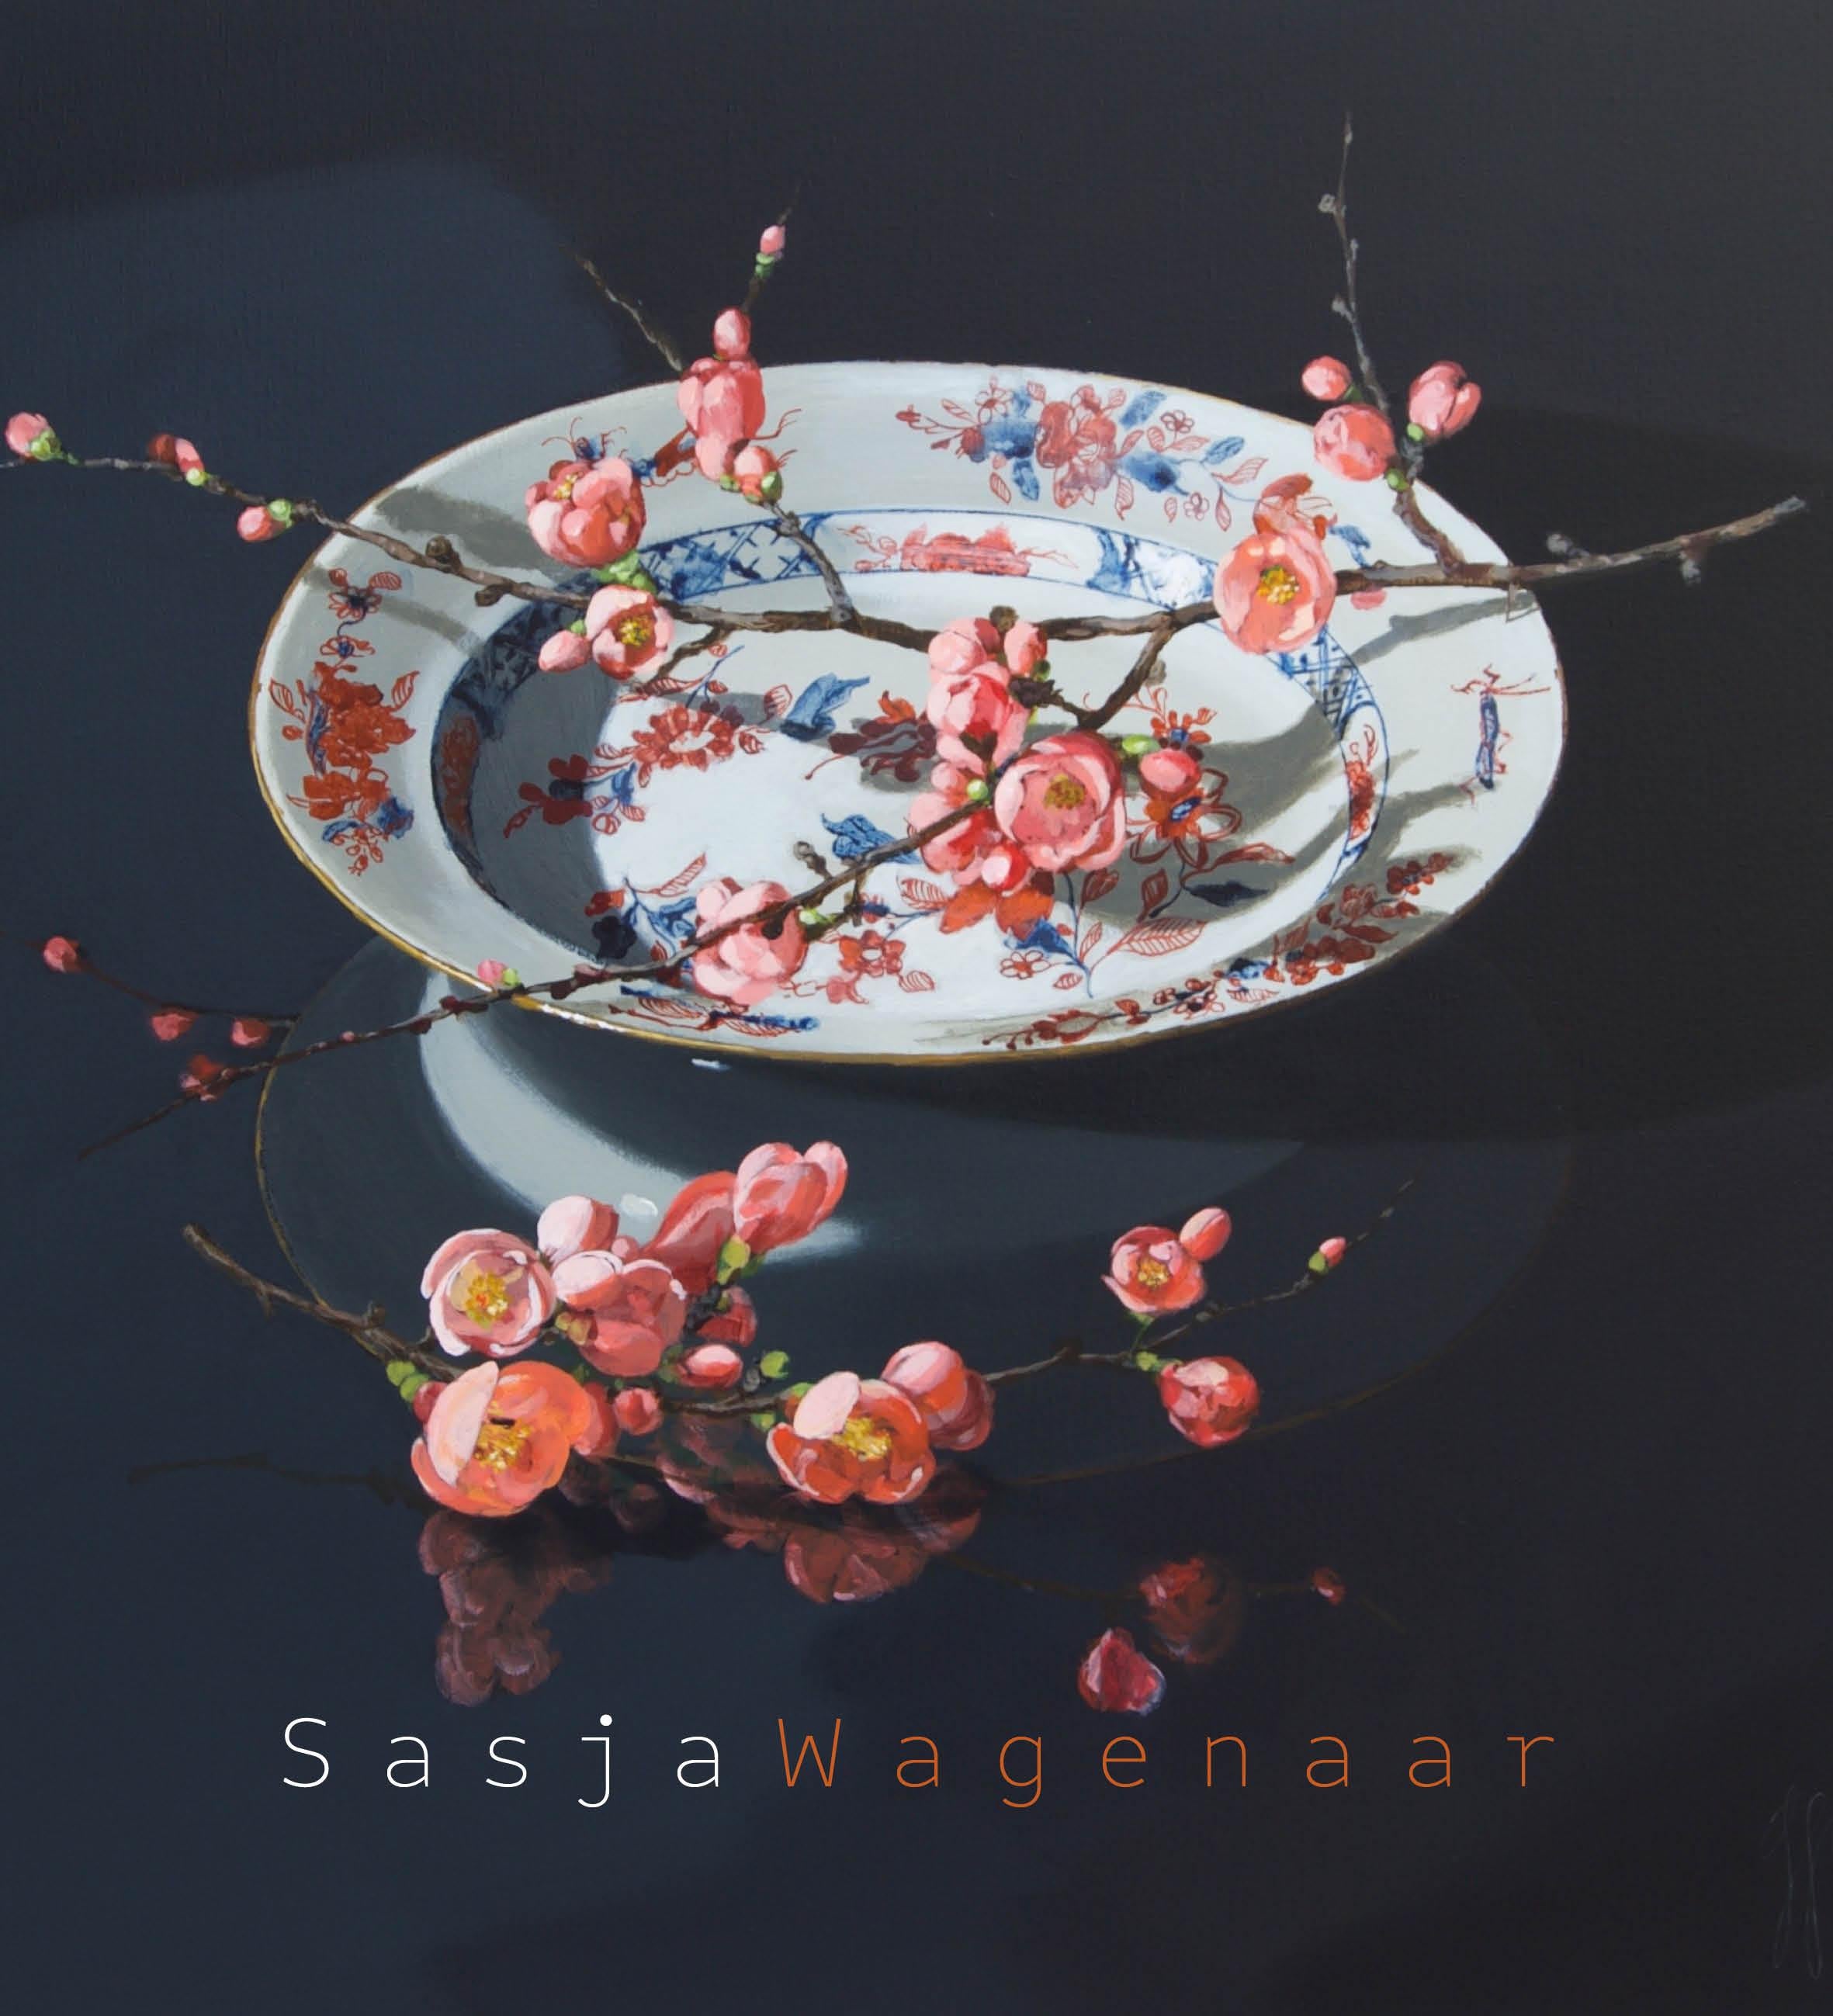 ''Snow white'' Dutch Contemporary Still Life with Porcelain and Flowers 6